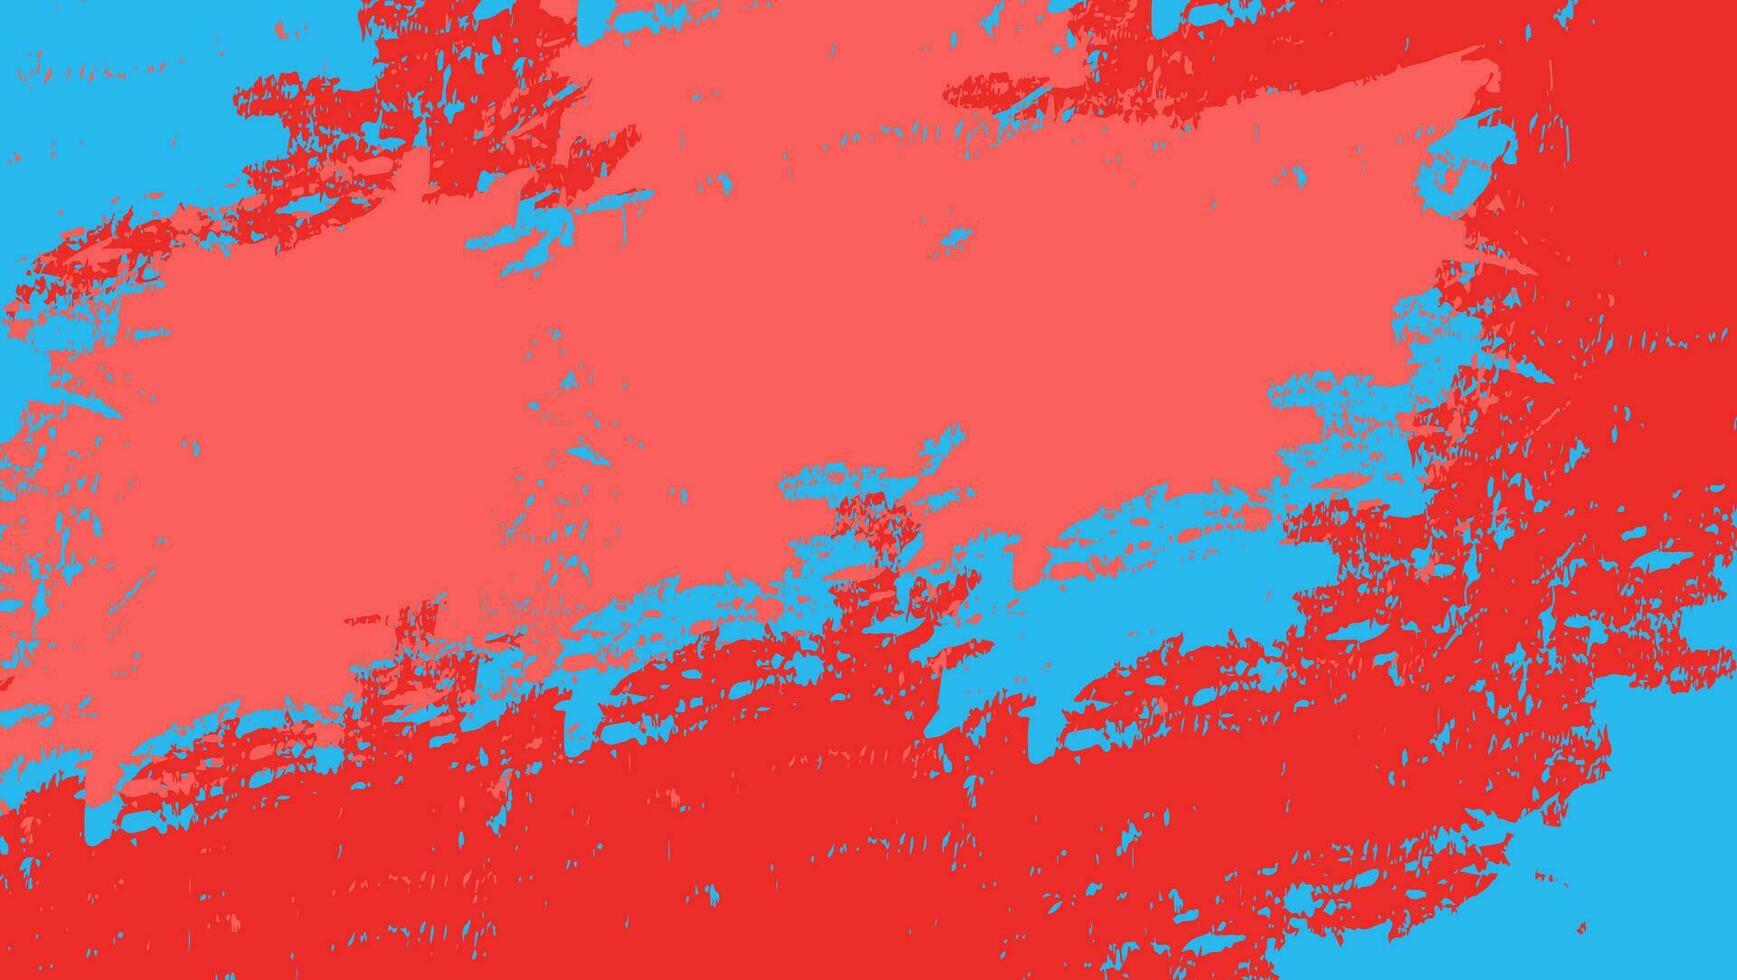 Abstract Bright Blue Red Paint Grunge Texture Background vector